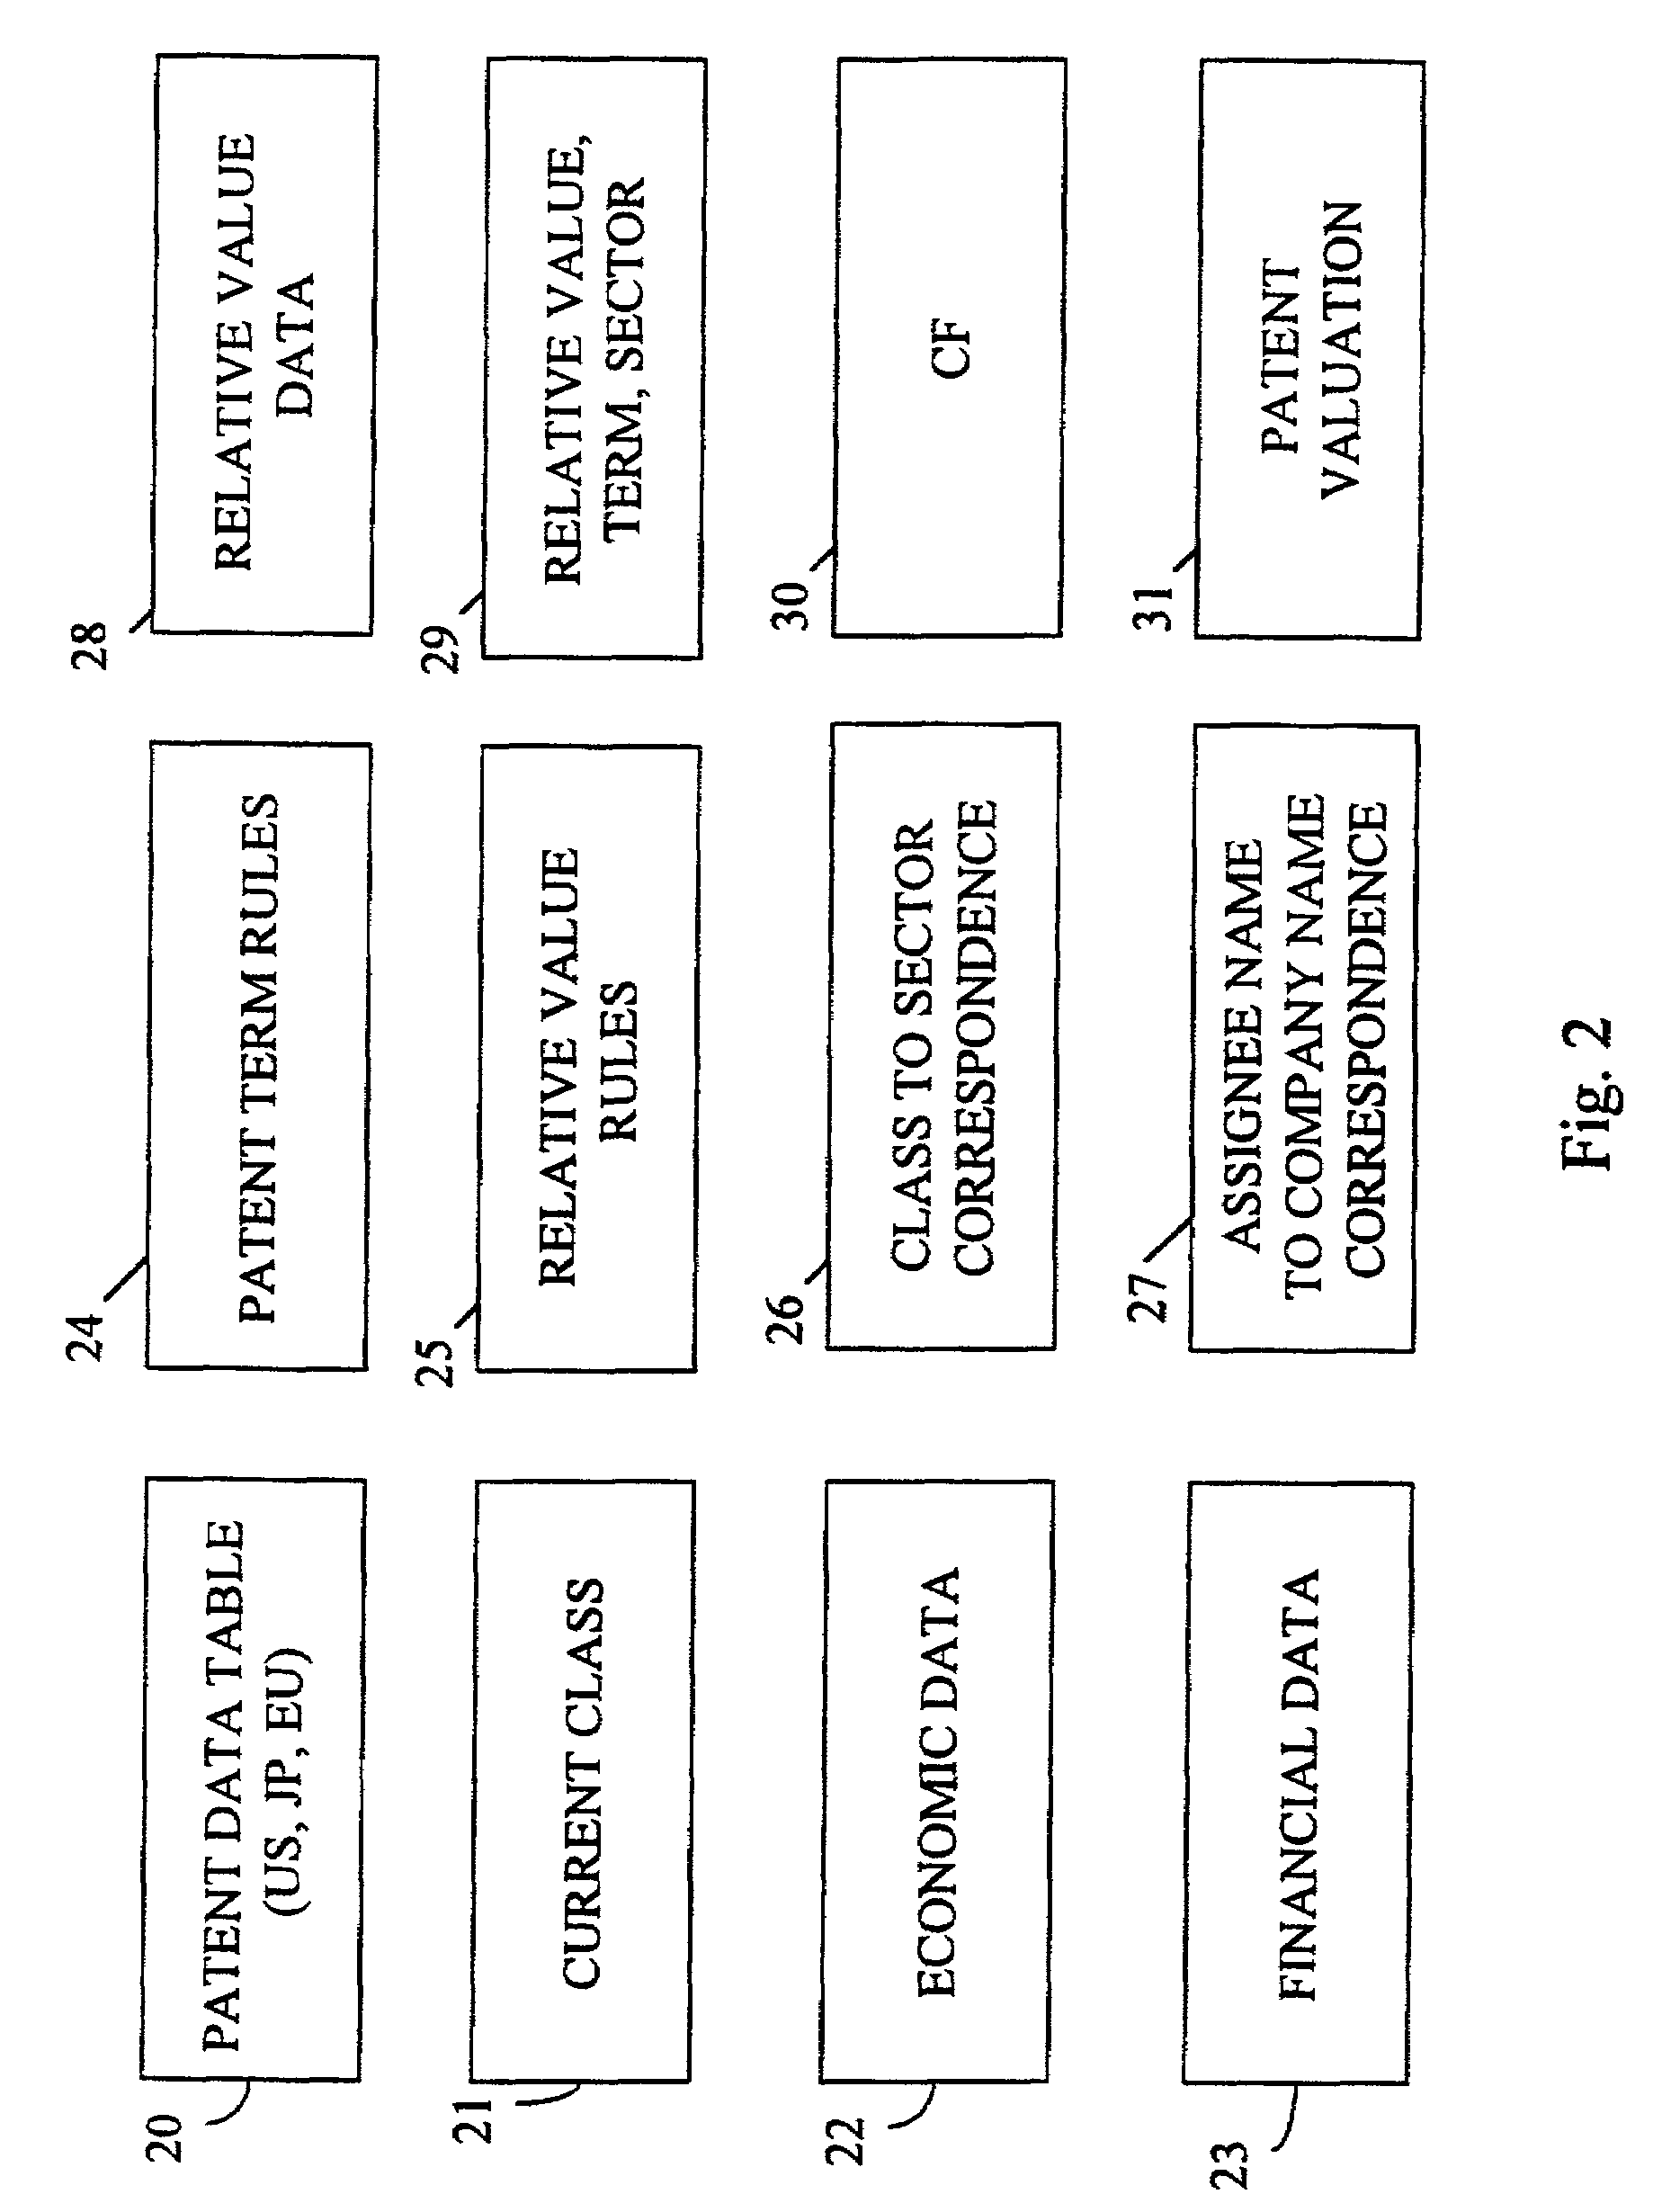 System and method for valuing patents